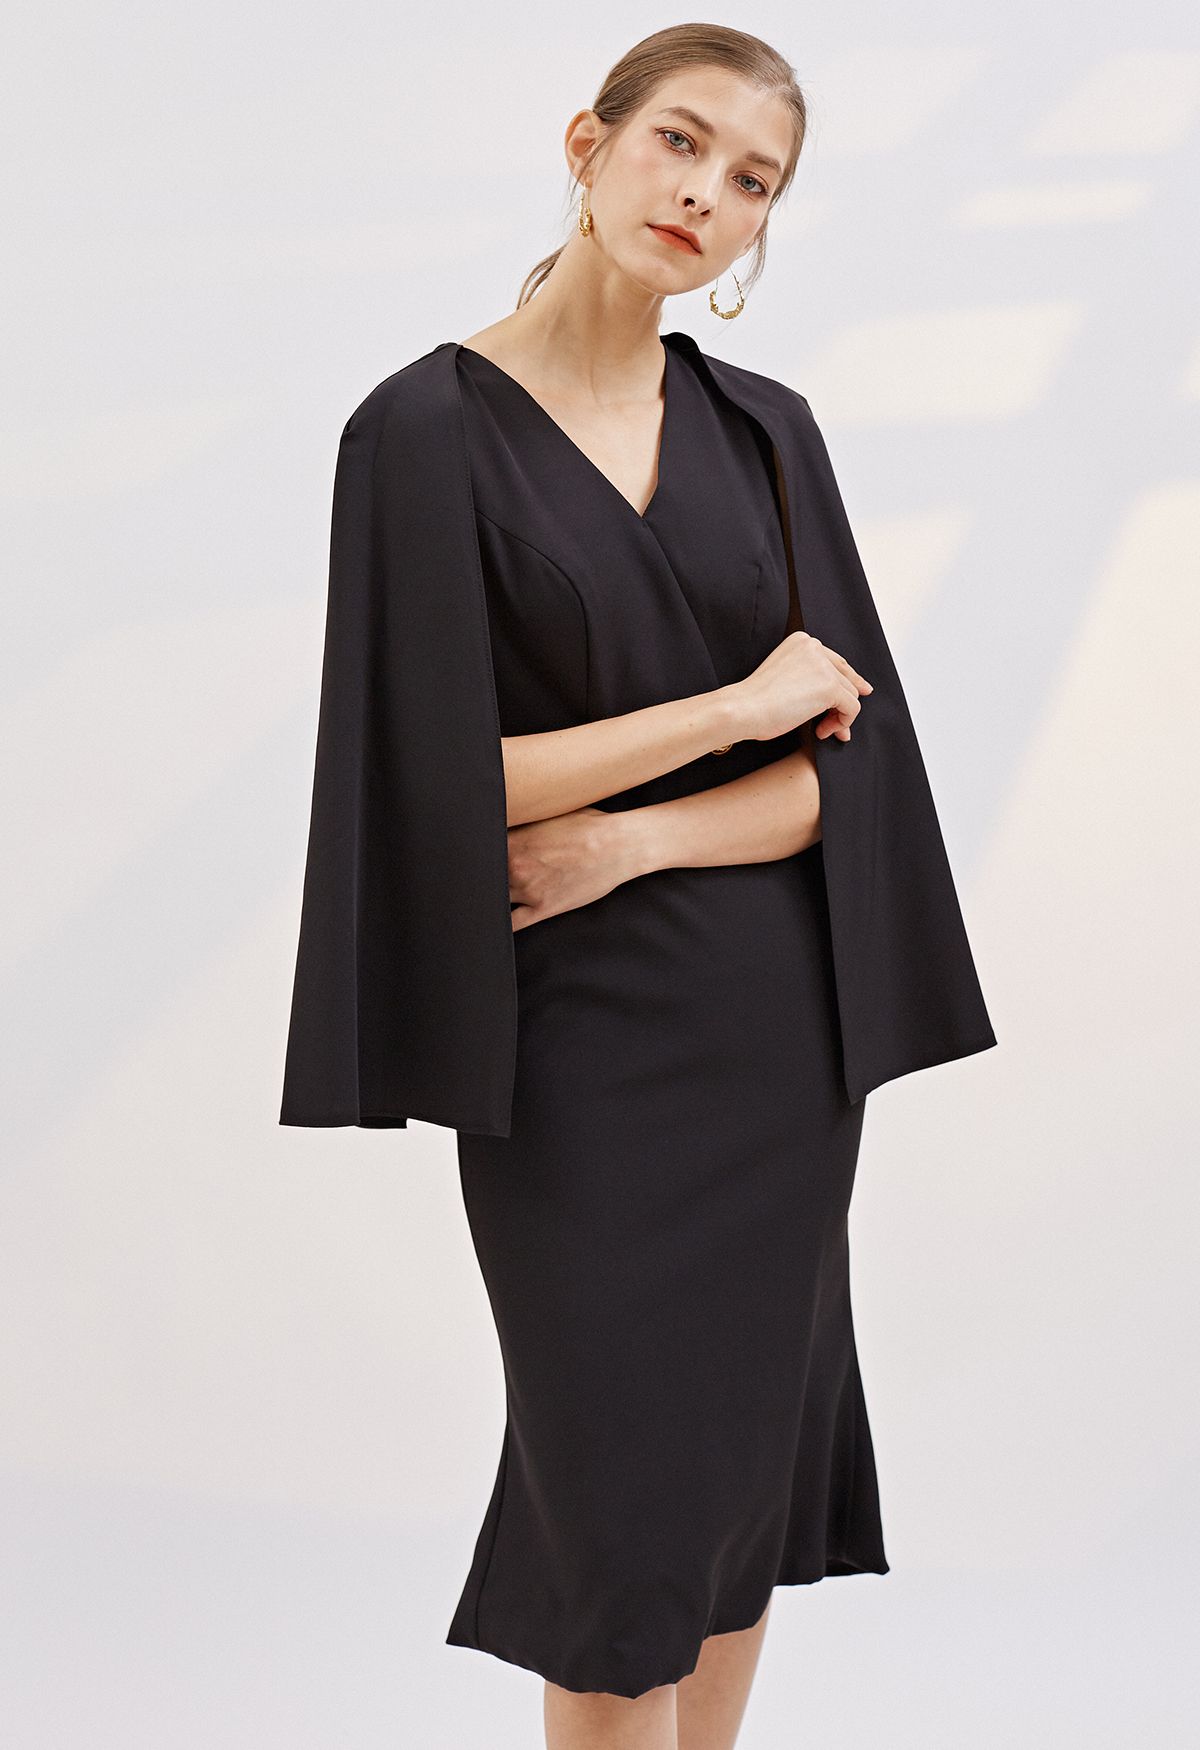 Golden Button Cape Sleeve Cocktail Dress in Black